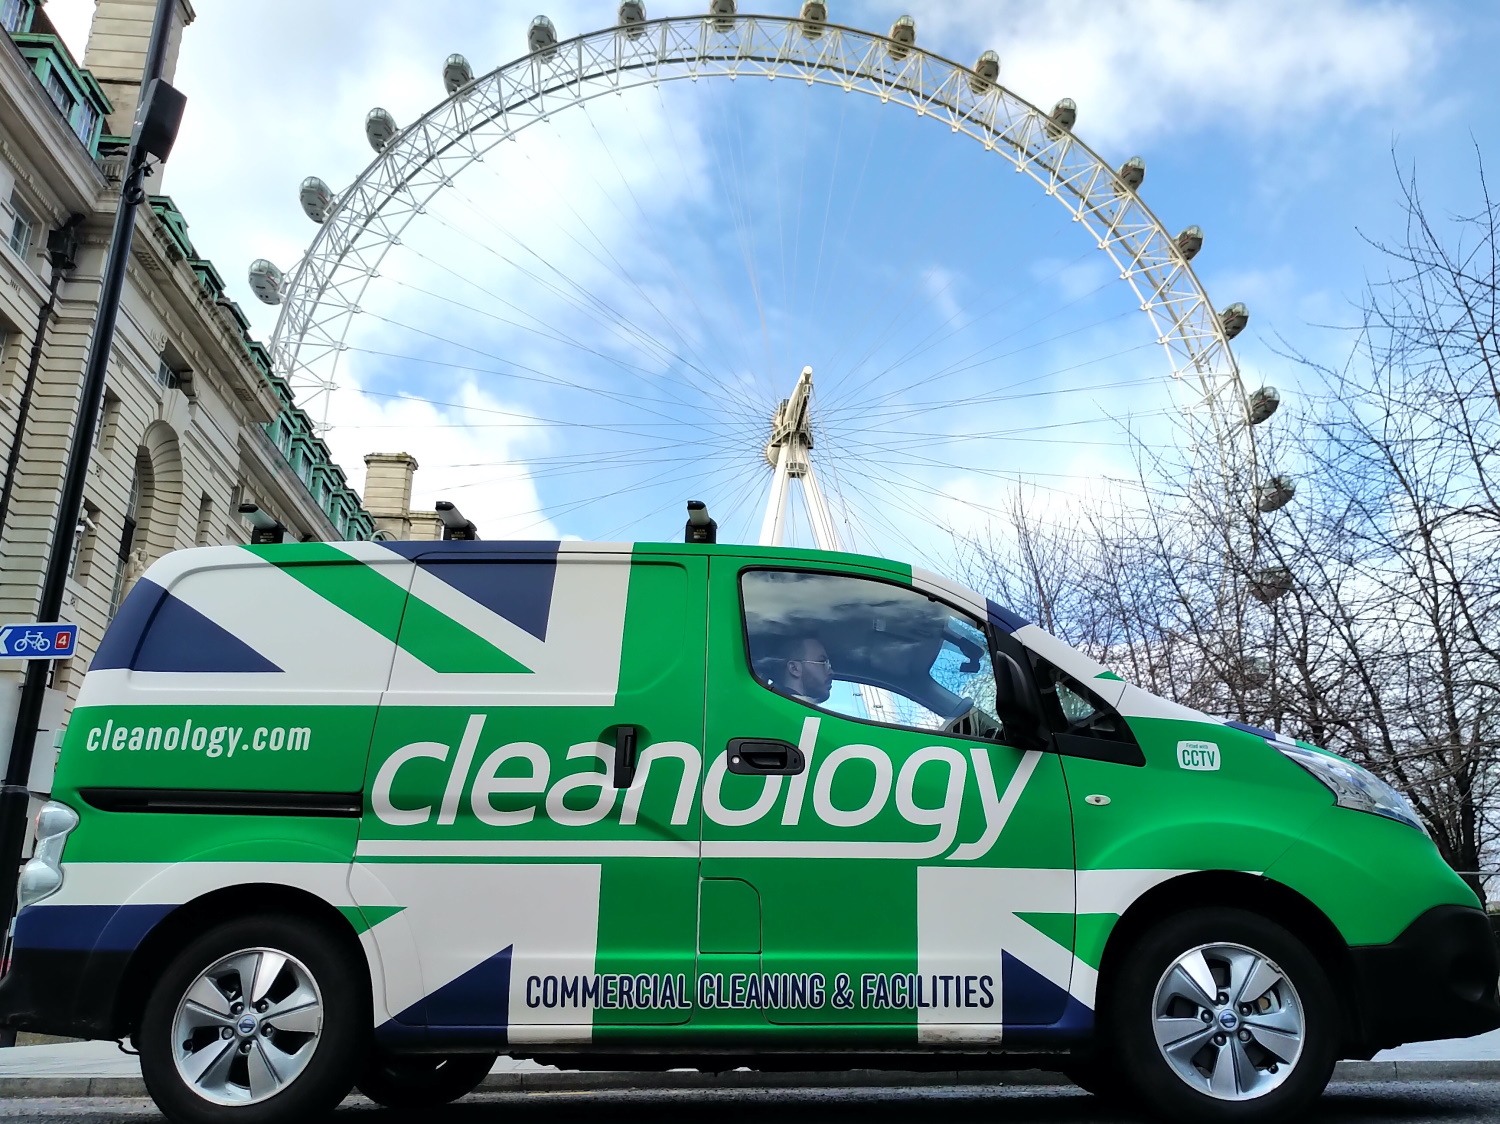 Telling Cleanology’s ever-evolving sustainability story